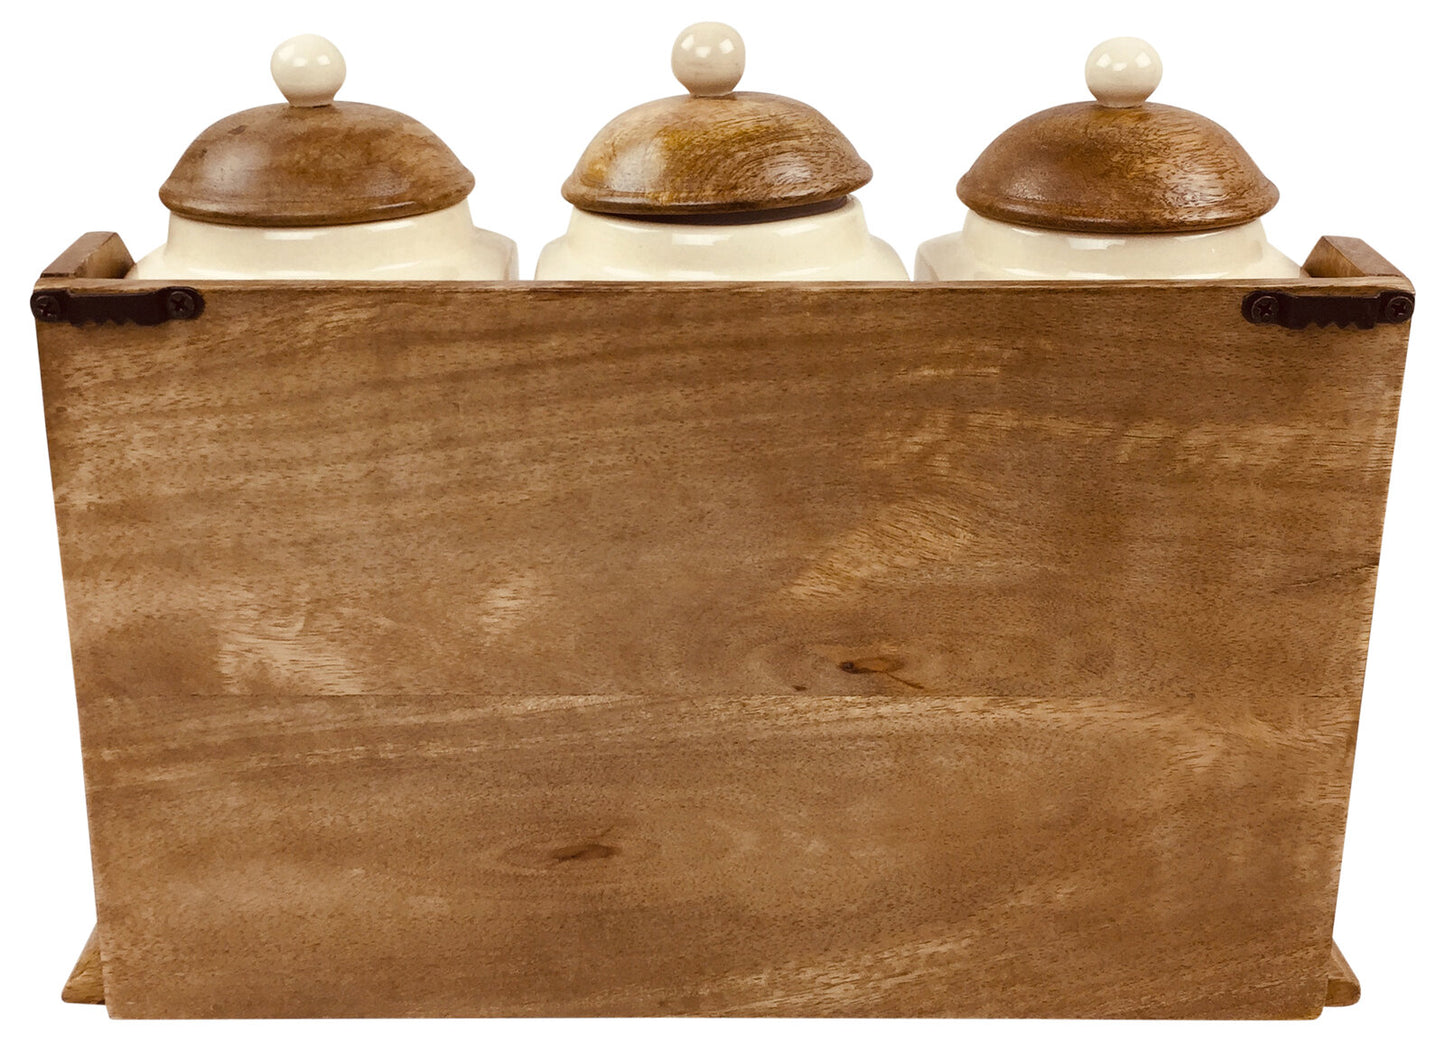 Three Ceramic Jars With Wooden Drawers